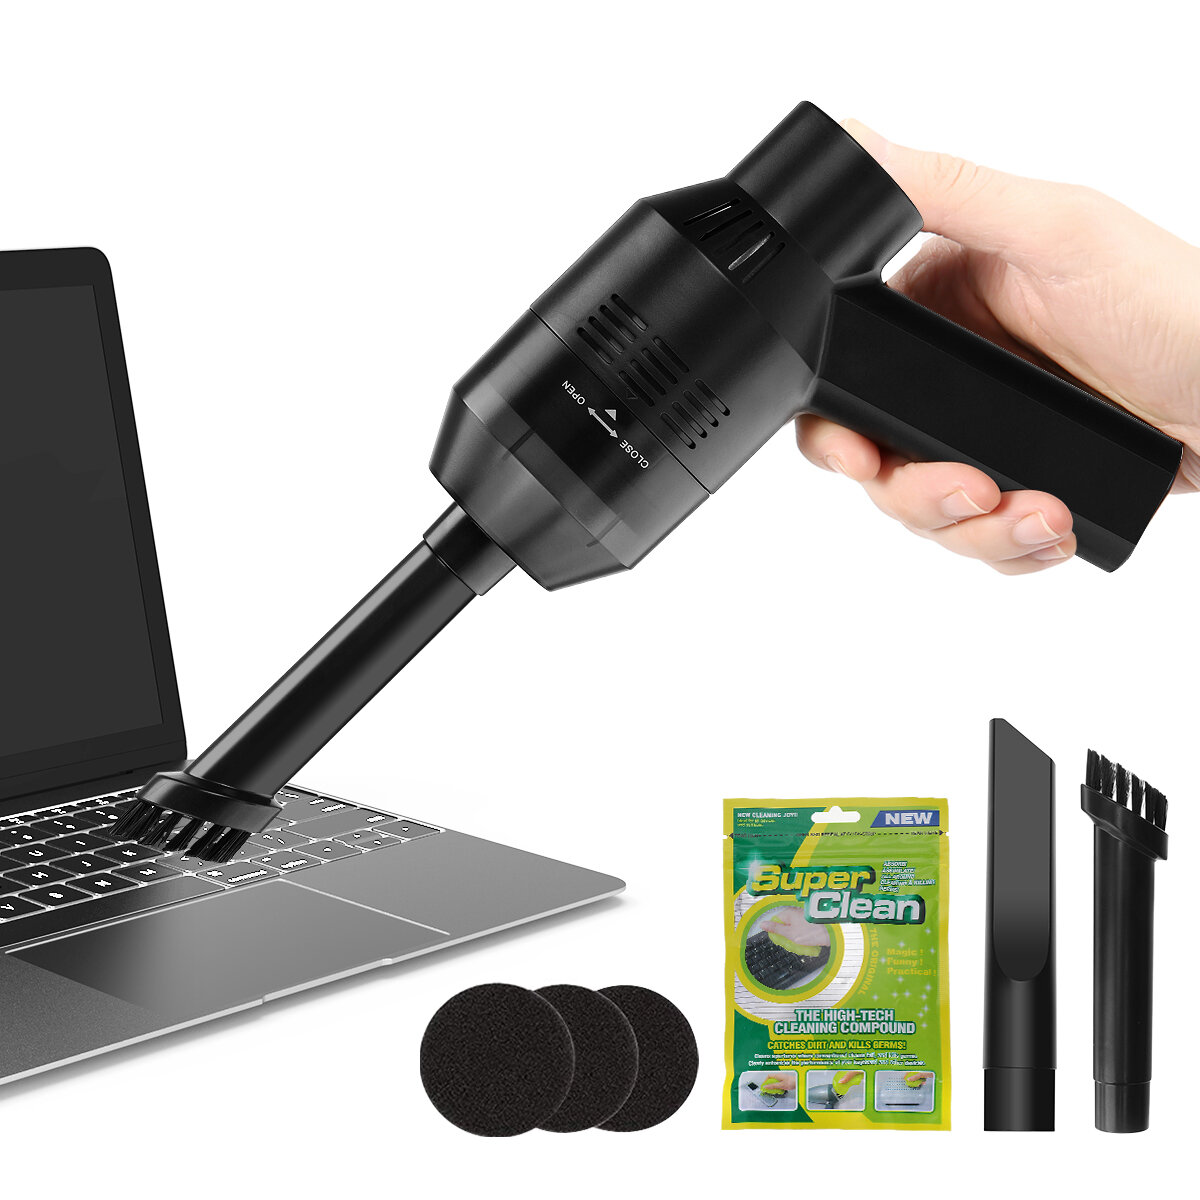 MECO Keyboard Vacuum Cleaner with Cleaning Gel Rechargeable Mini Cordless Desktop Cleaning Tool for Cleaning Dust Hairs